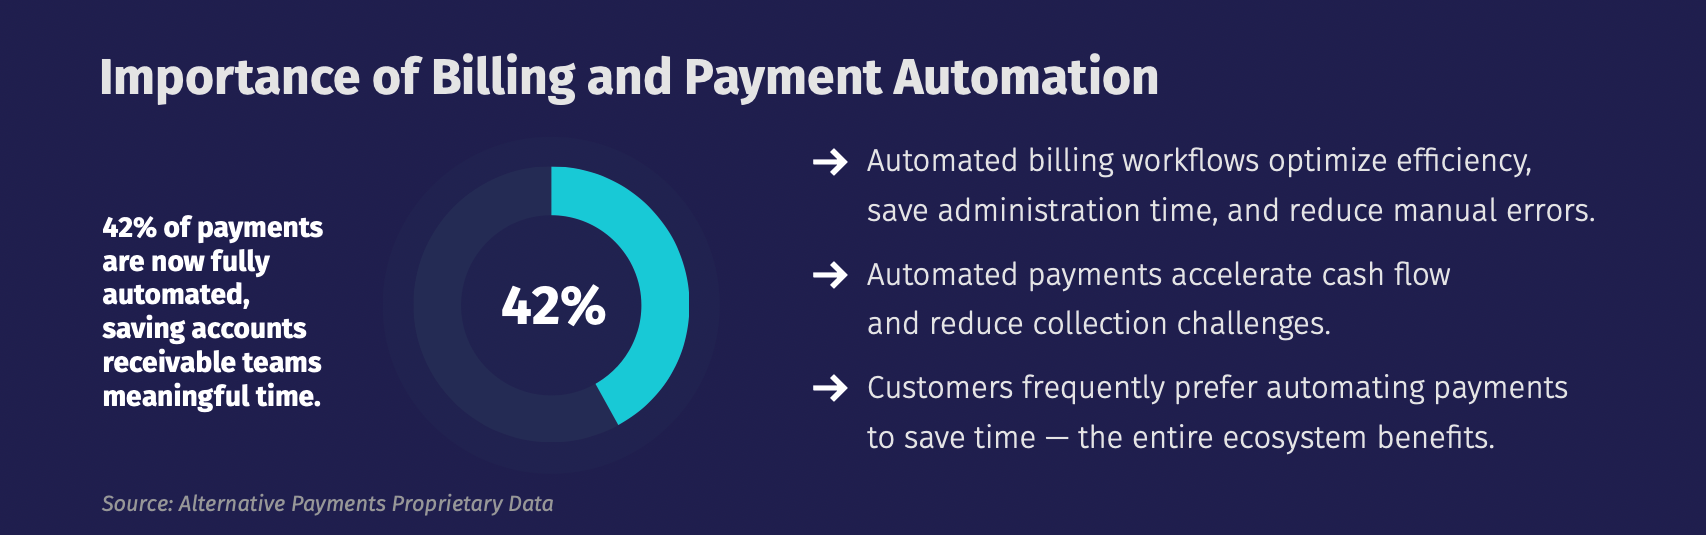 A graphic highlighting the significant impact of payment automation, with 42% of payments automated, represented by a partially filled circular chart.